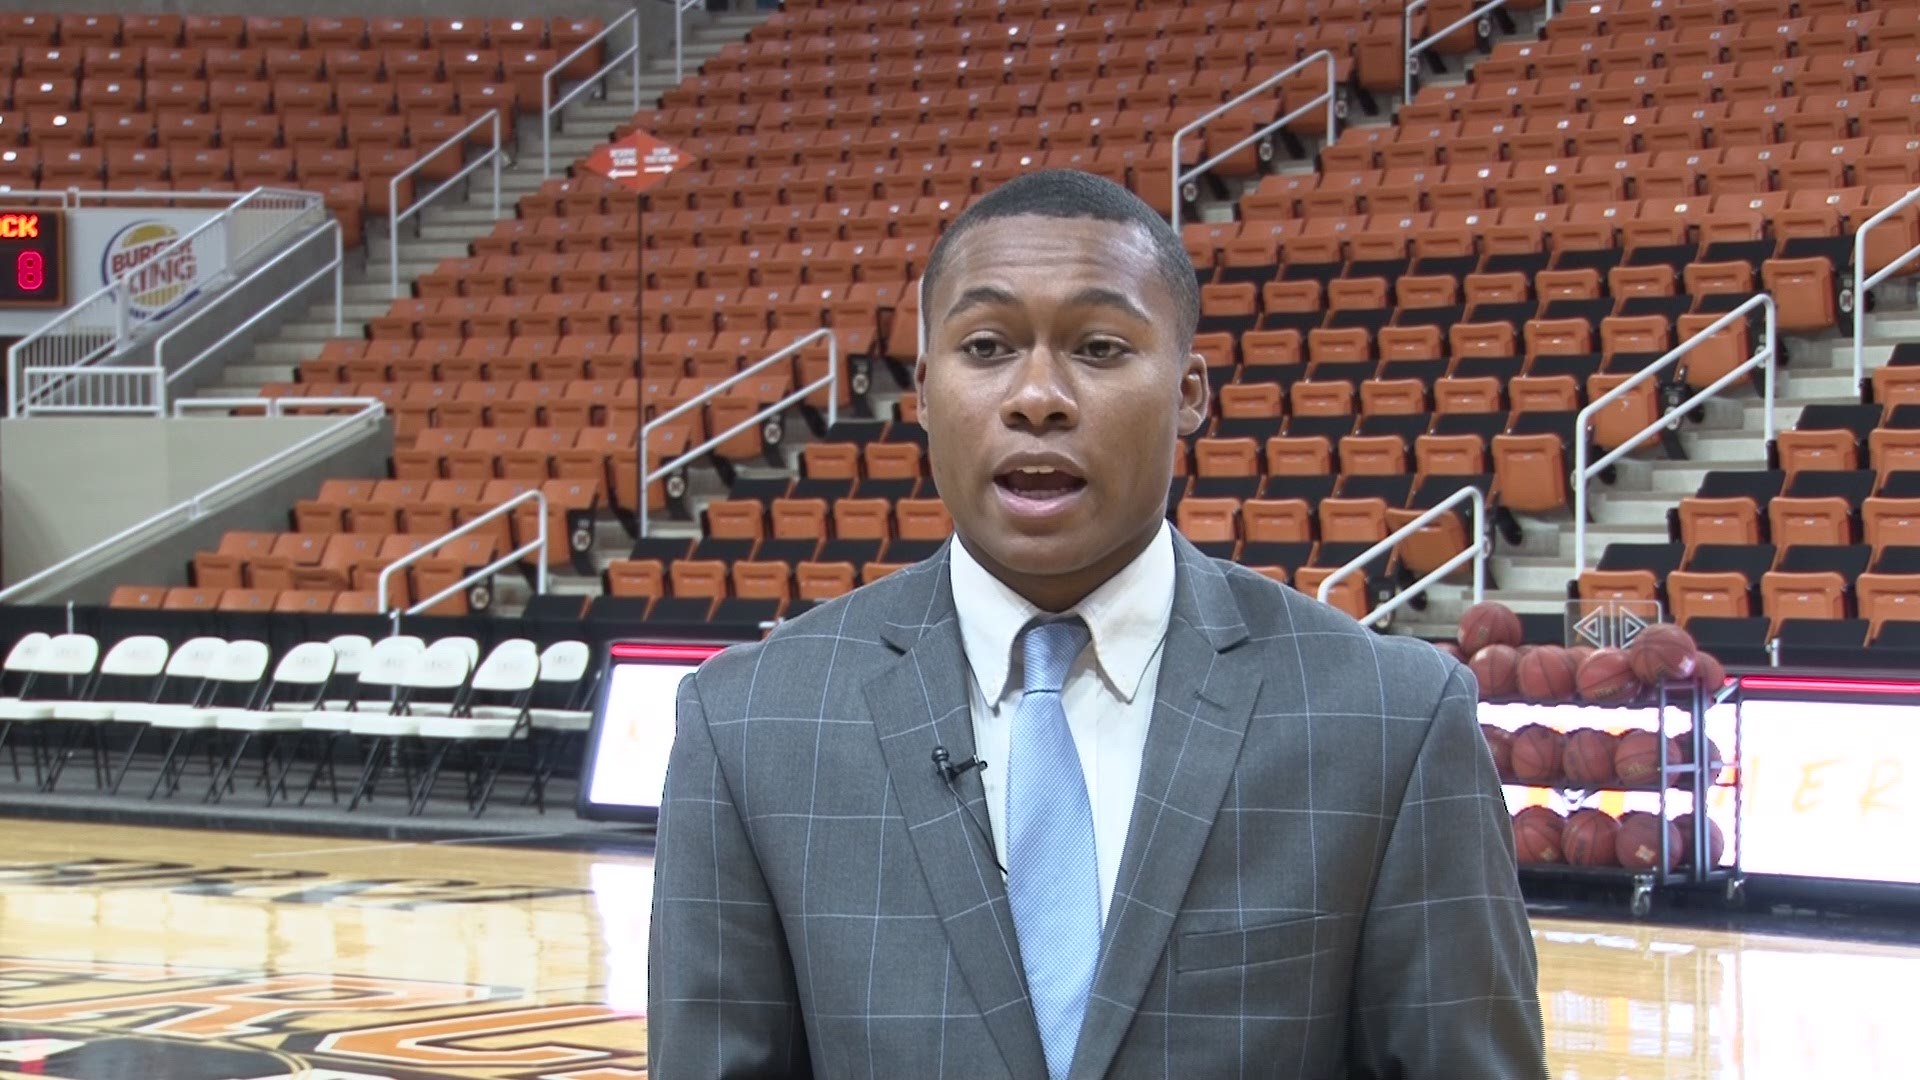 13WMAZ reporter Avery Braxton is a Mercer University graduate and works part-time for the school' sports division as ESPN3 talent. Braxton explains what it's like to be a sports broadcaster and general assignment news reporter.